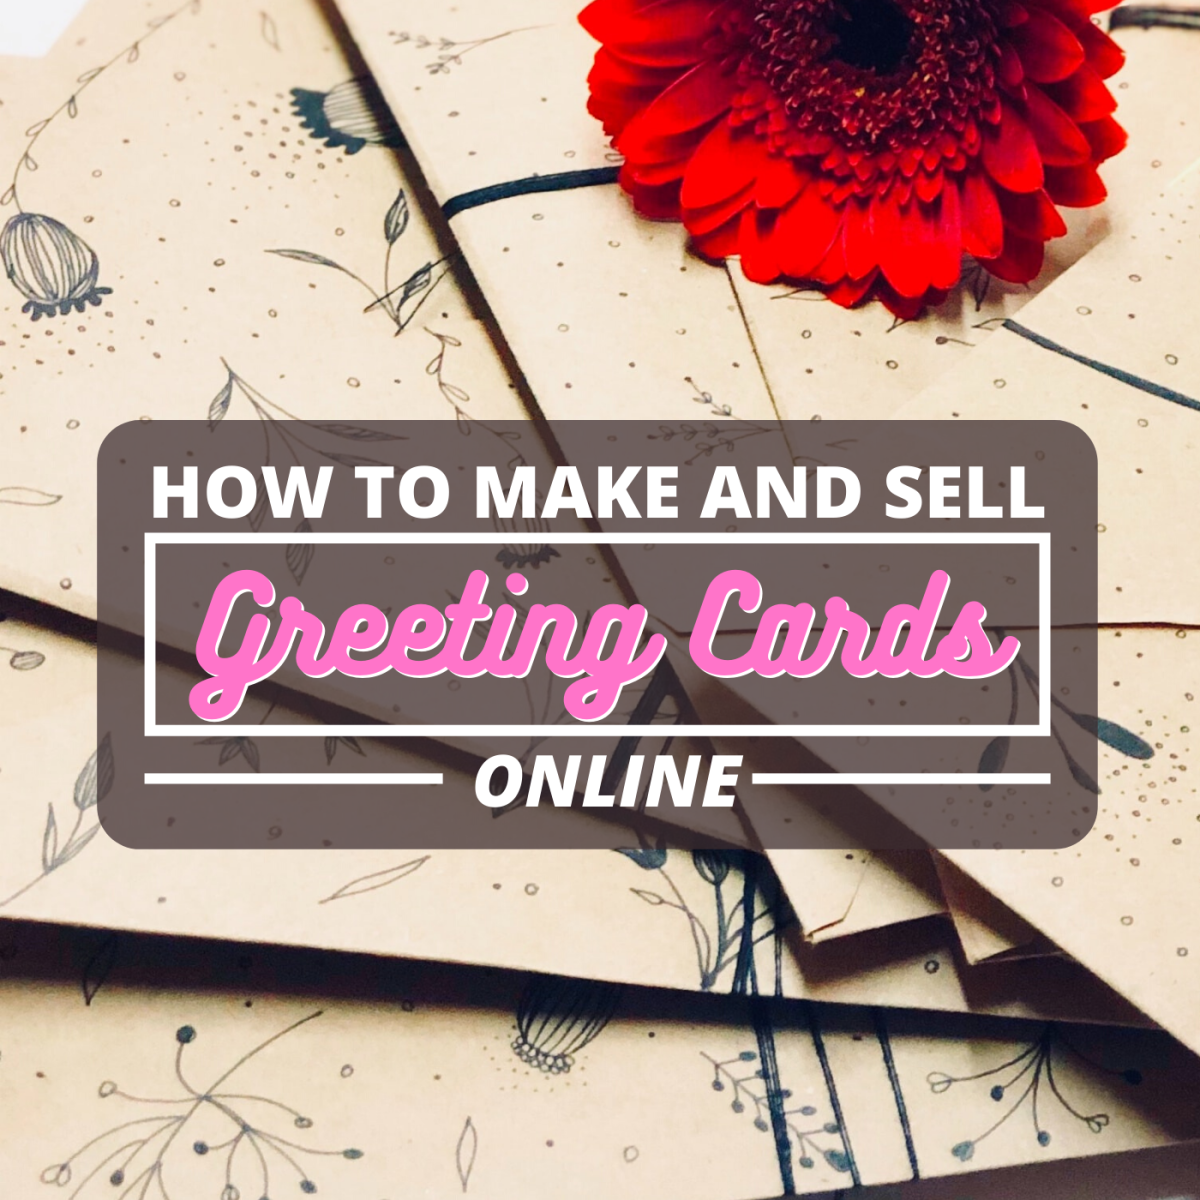 5 Ways to Sell Greeting Cards Online